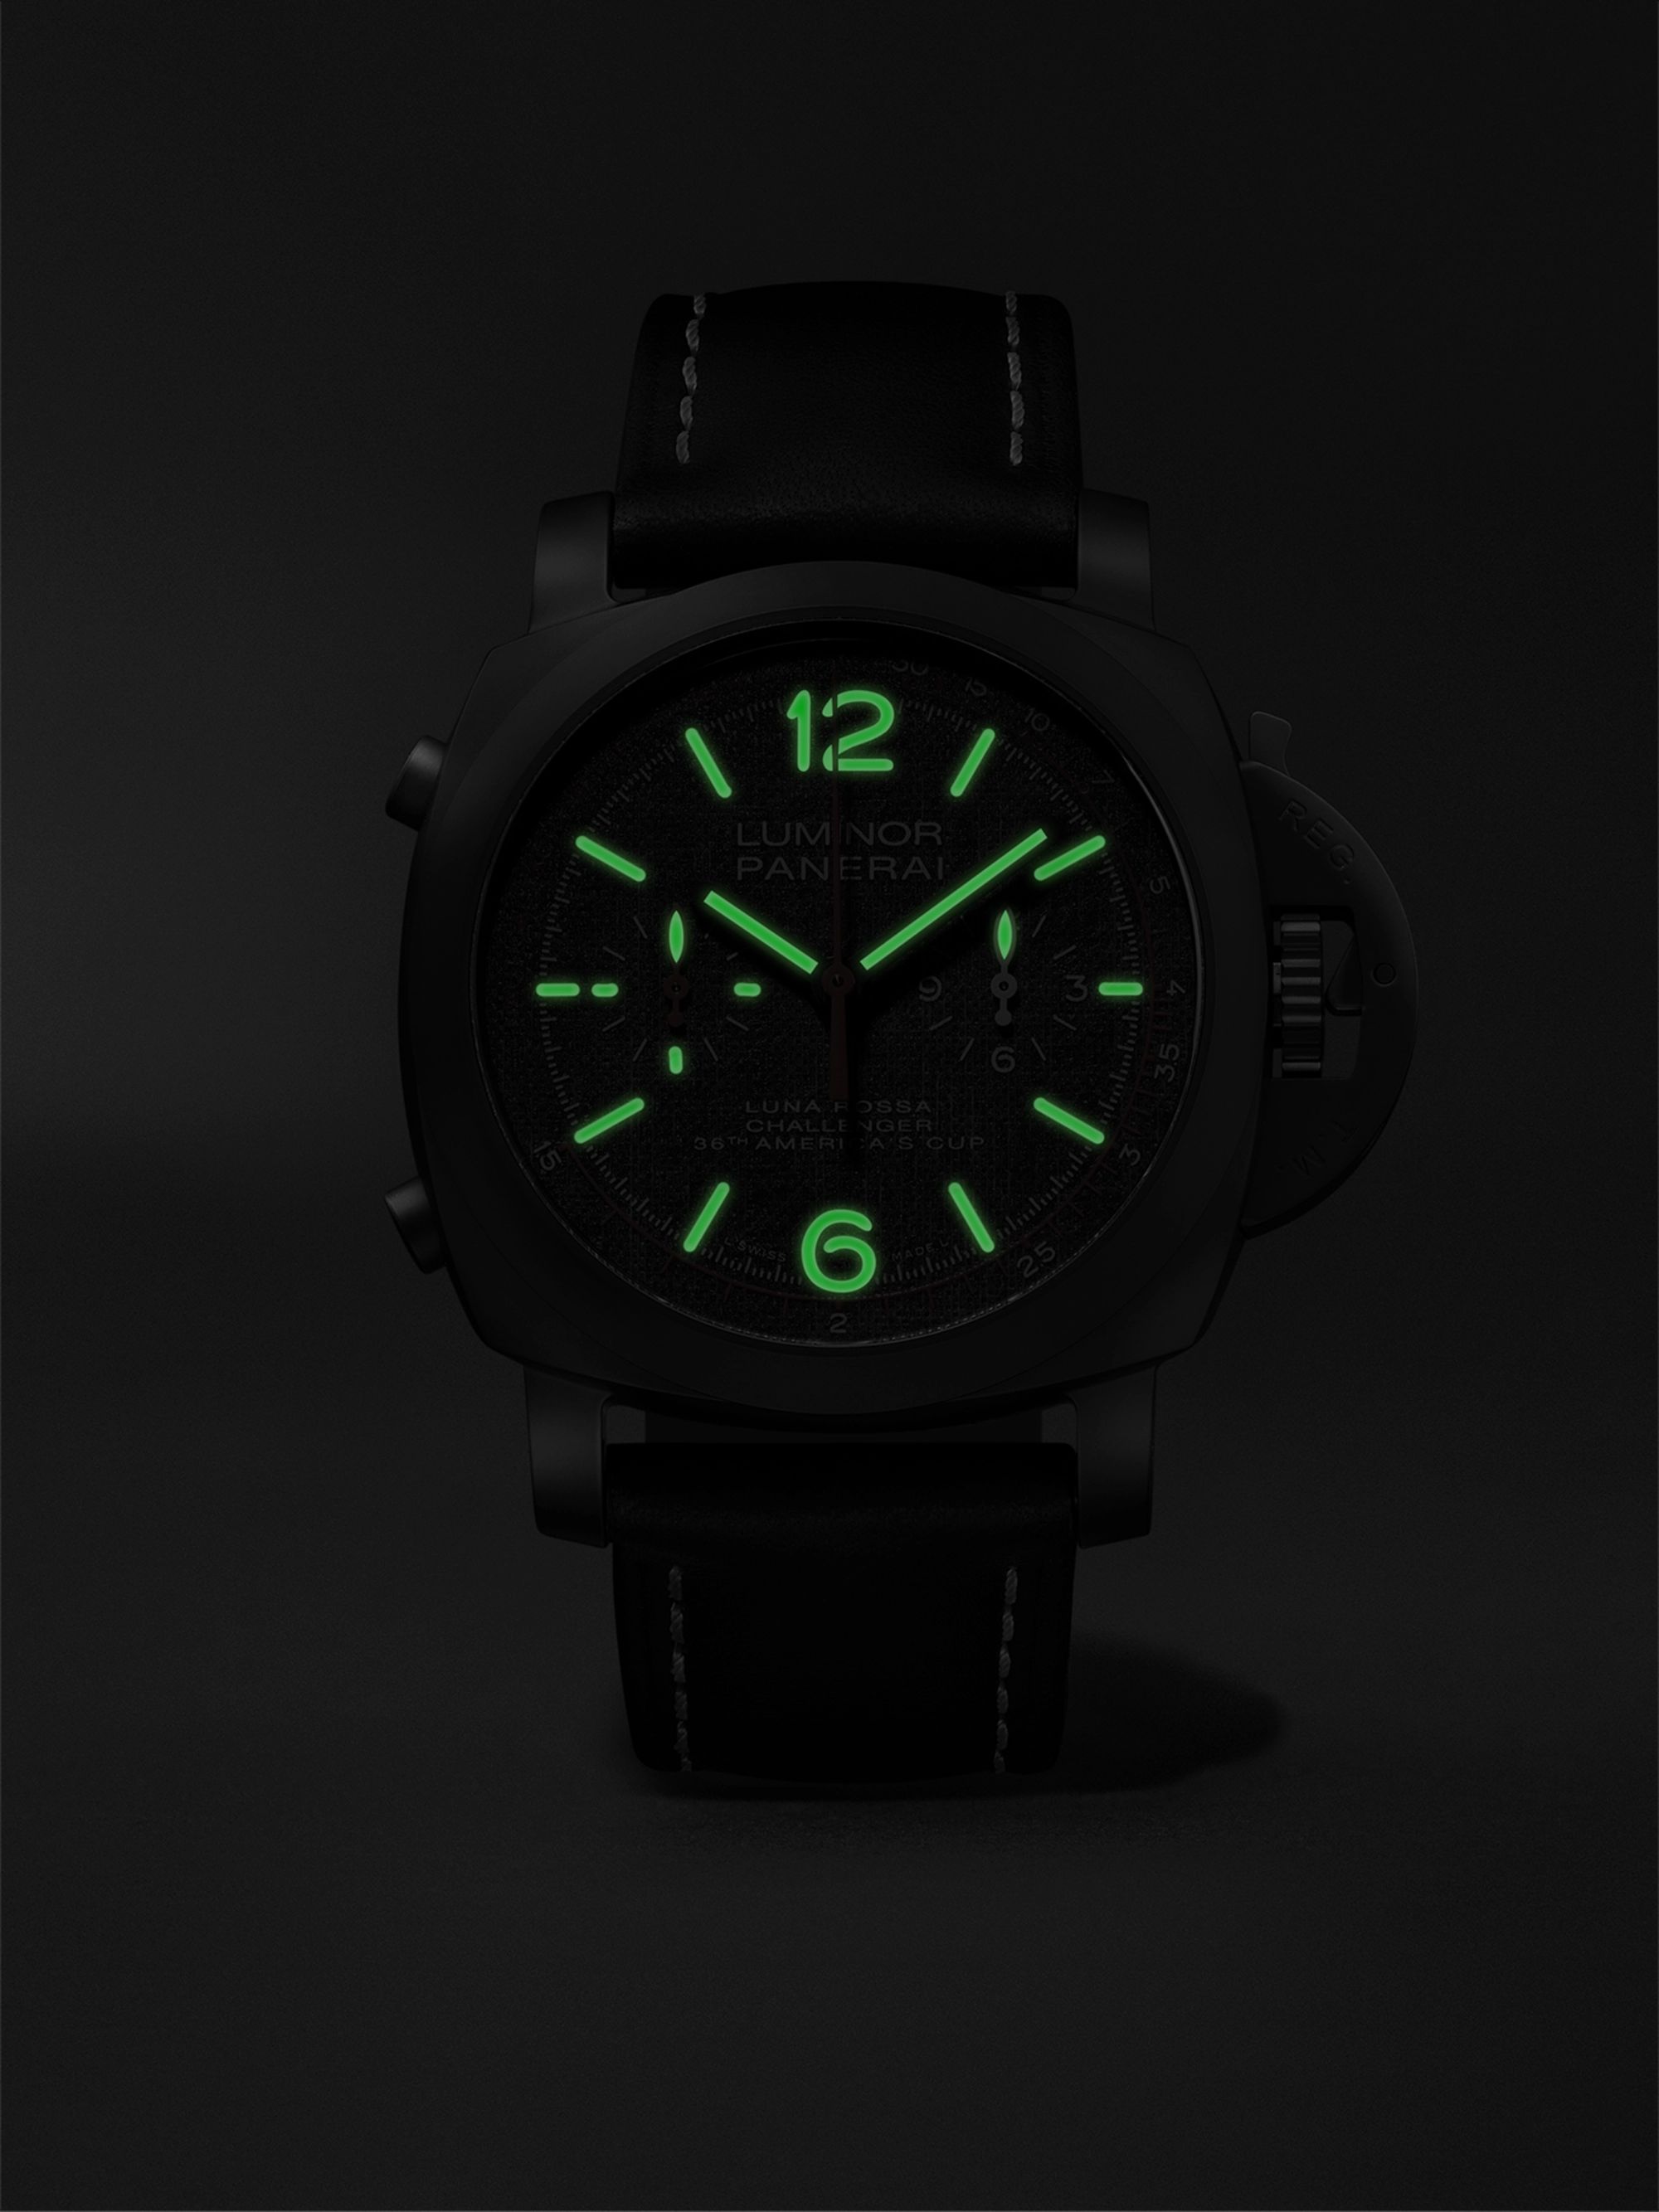 PANERAI Luminor Luna Rossa Automatic Flyback Chronograph 44mm Ceramic and Leather Watch, Ref. No. PAM01037